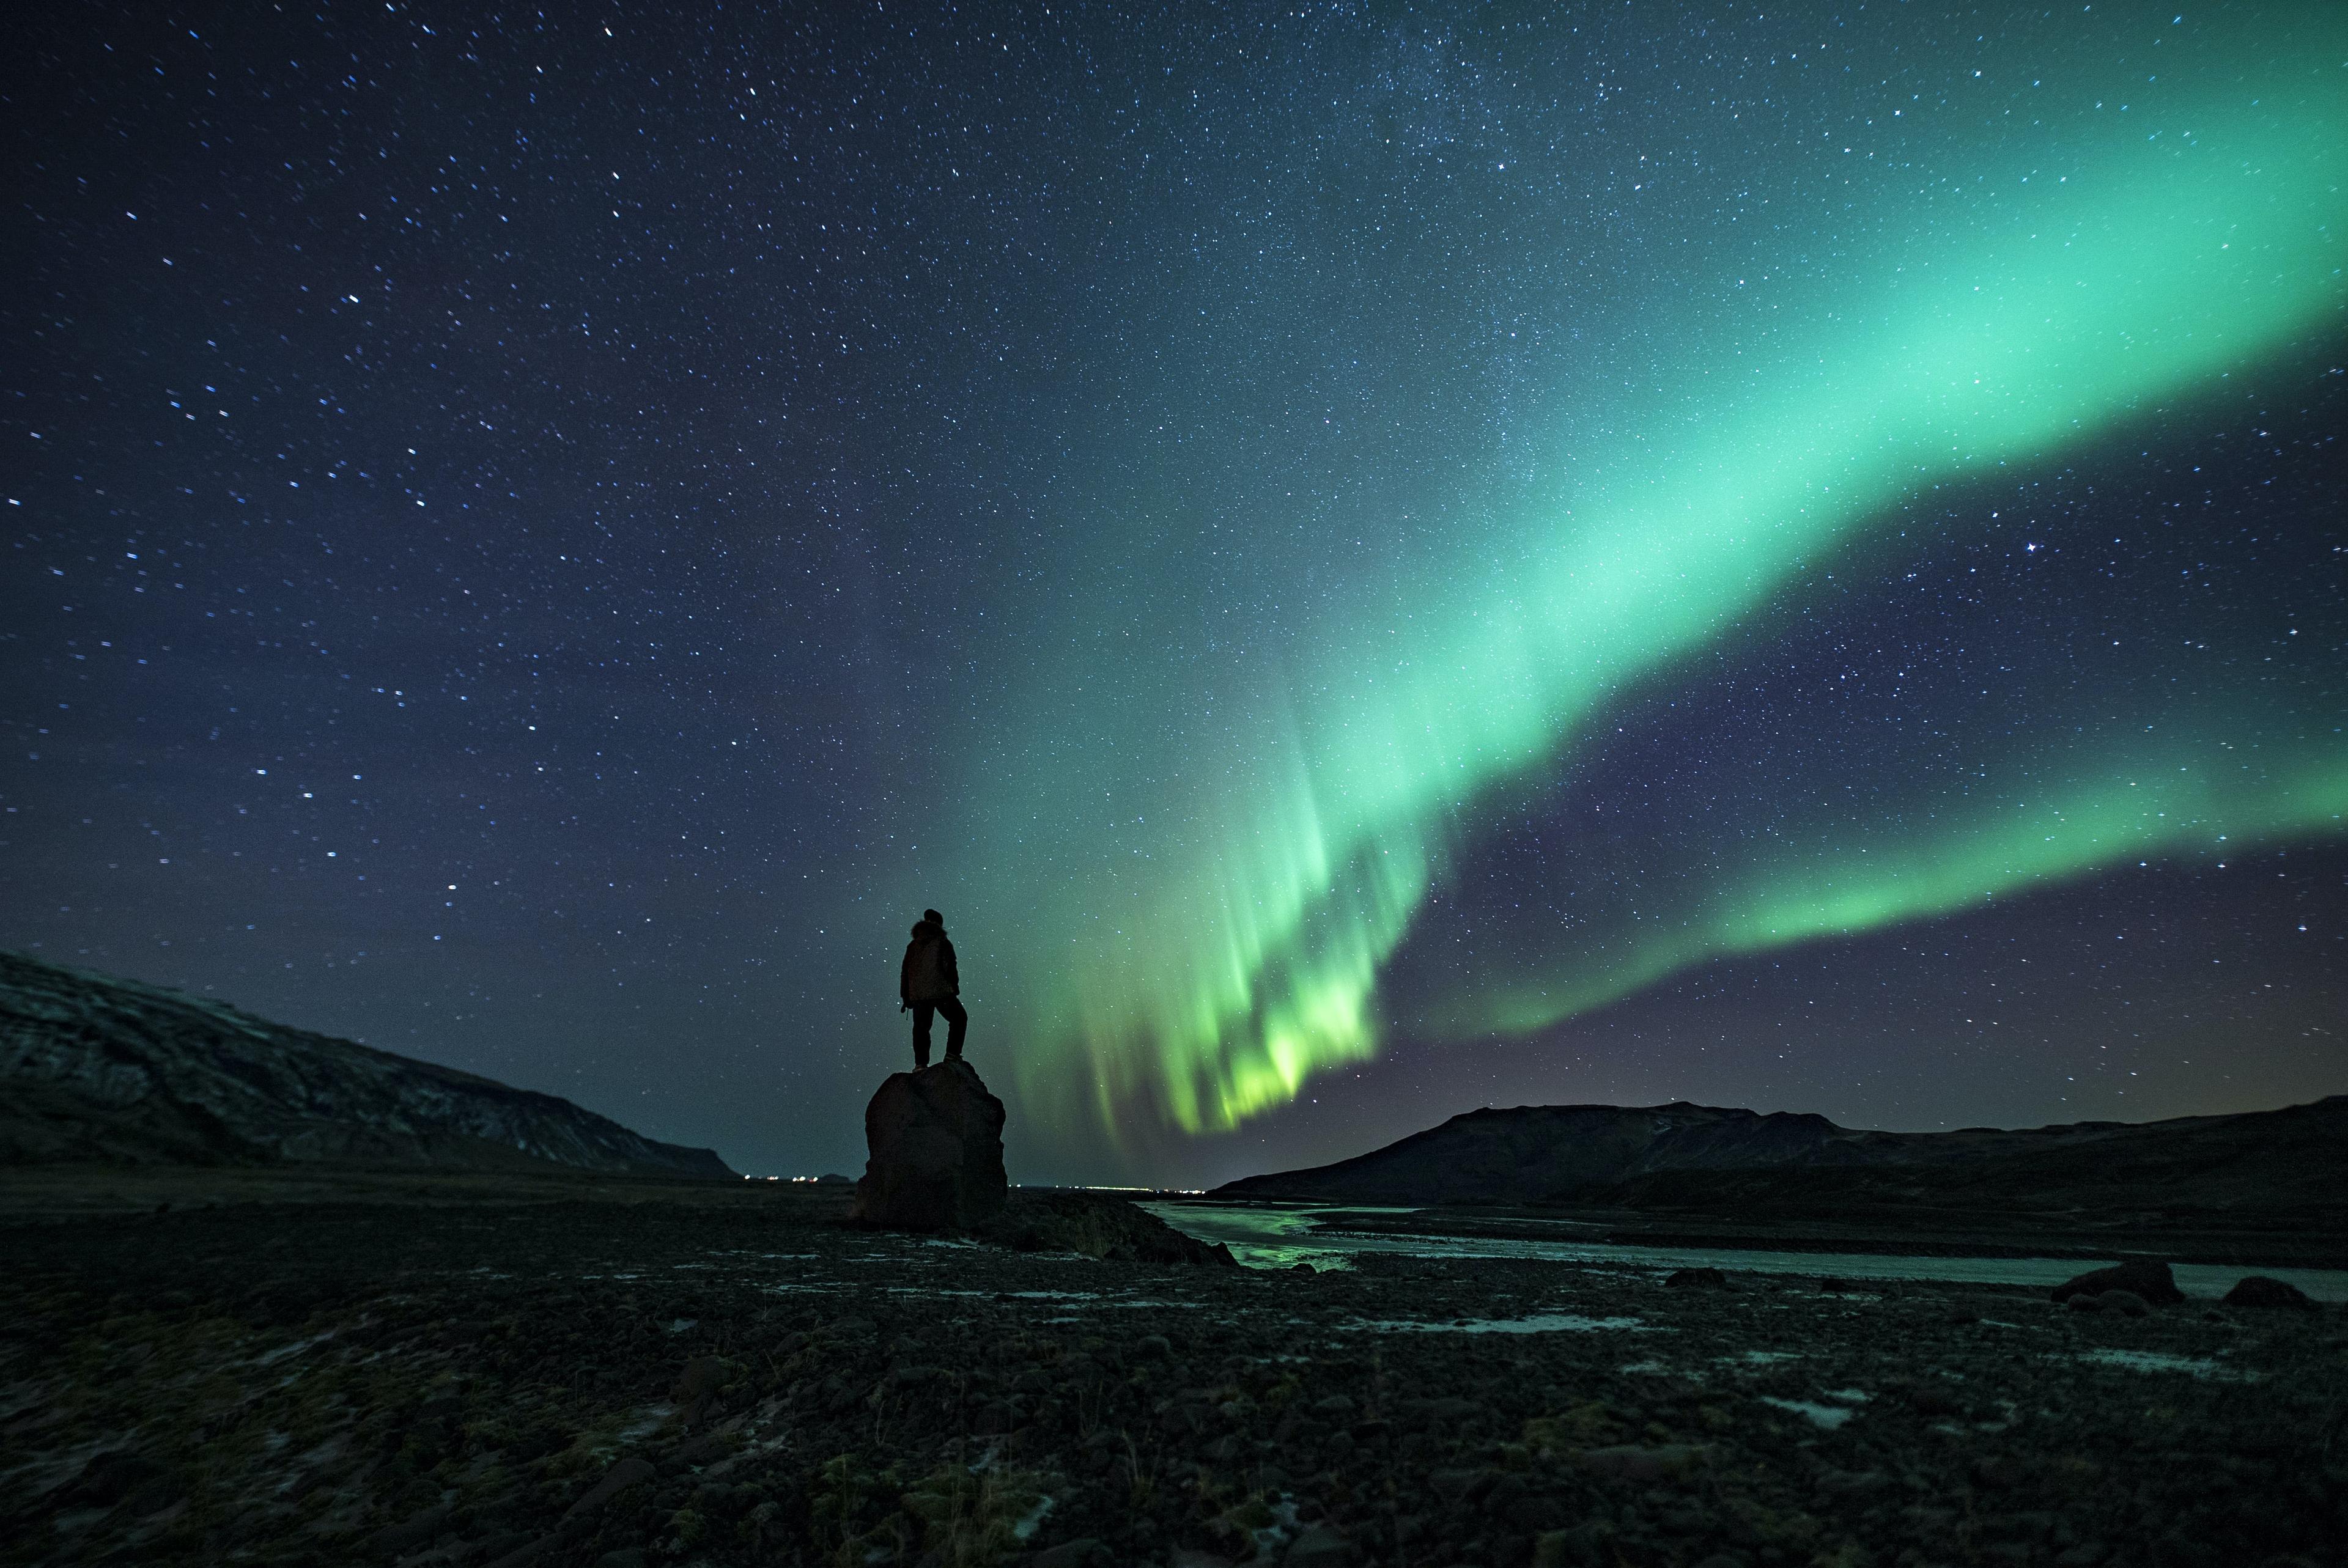 A person standing atop a rock, gazing at the Northern Lights under a star-filled sky.